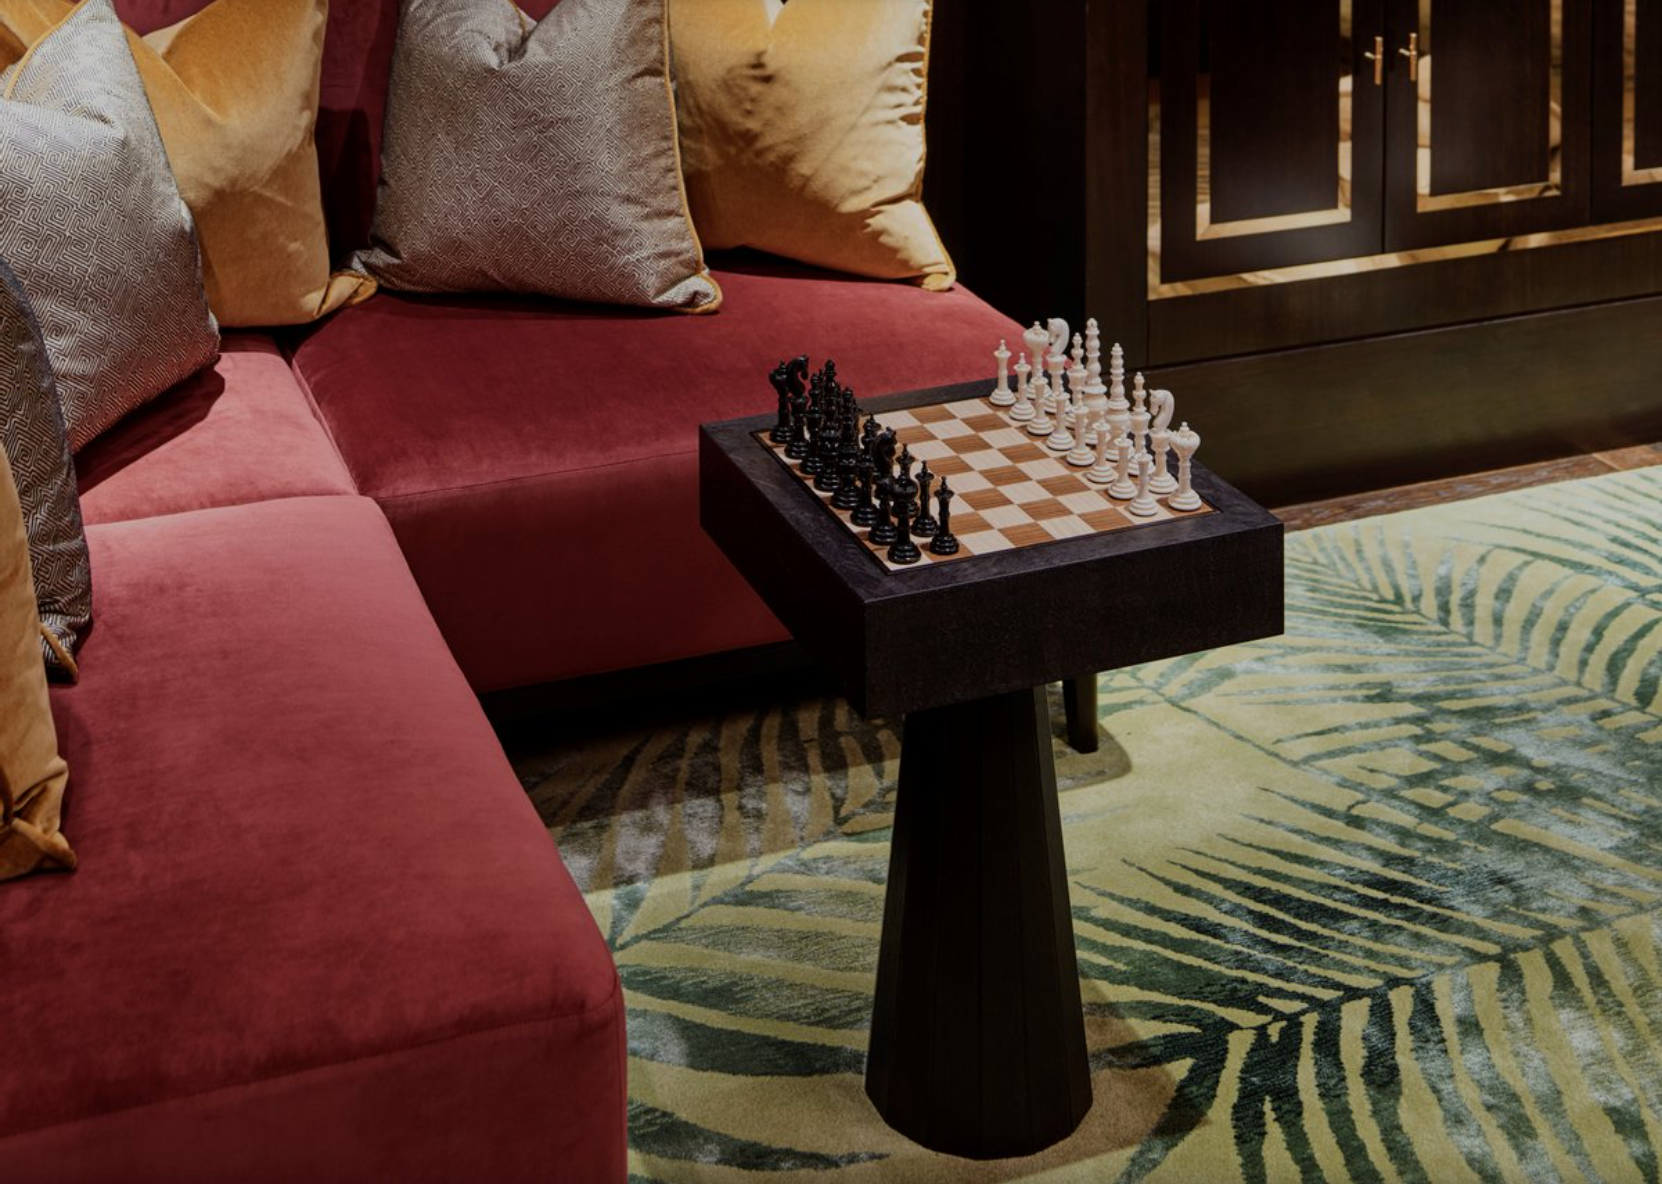 Get ahead of the game with a vintage chess set/coffee table